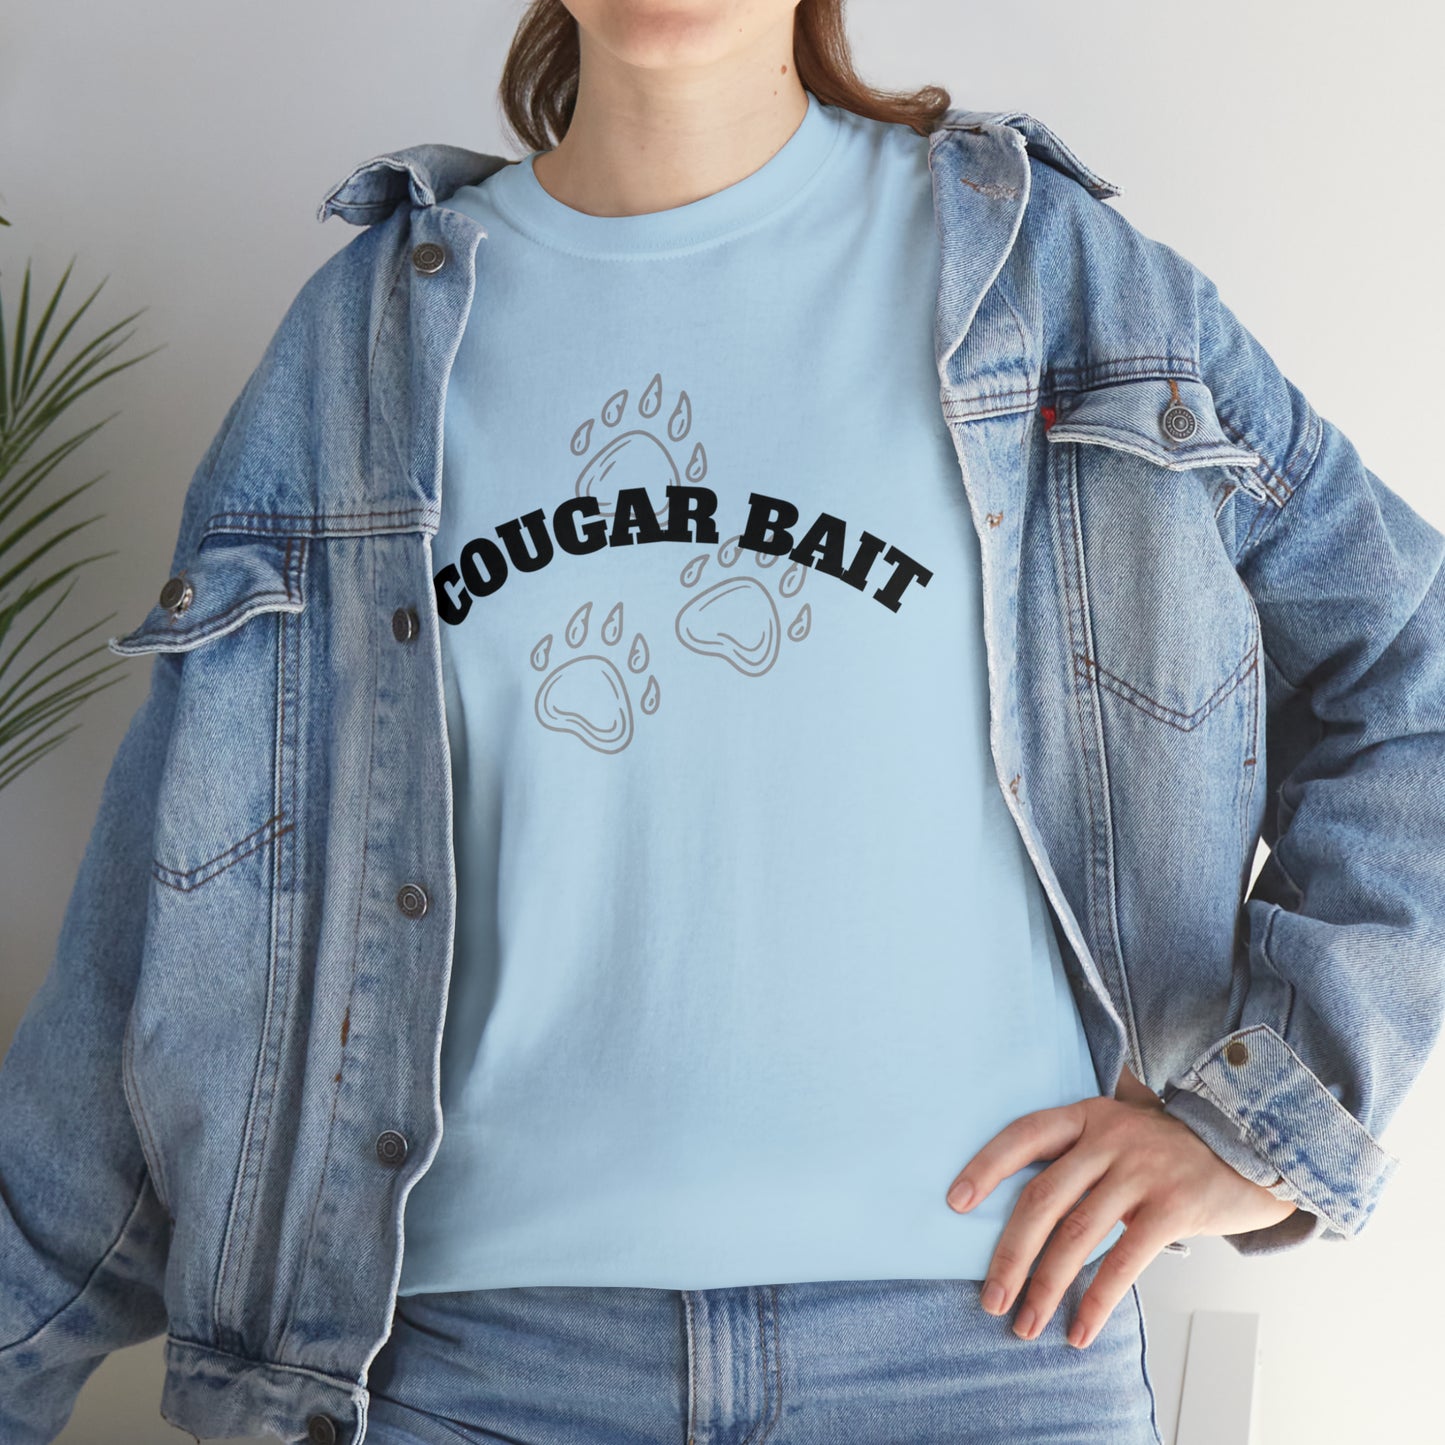 Unisex Heavy Cotton Tee - Cougar Bait with prints